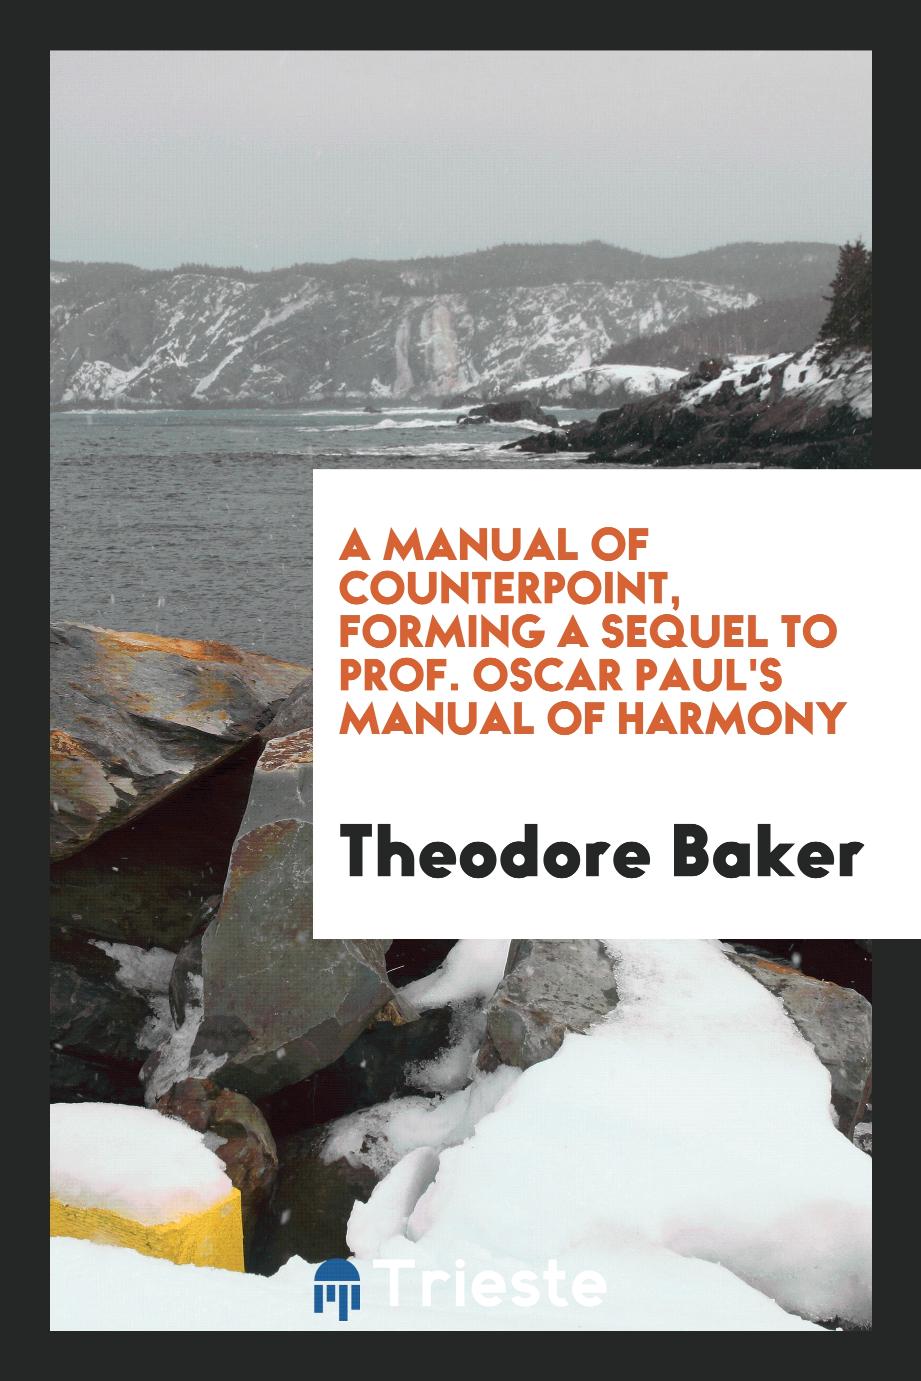 A Manual of Counterpoint, Forming a Sequel to Prof. Oscar Paul's Manual of Harmony